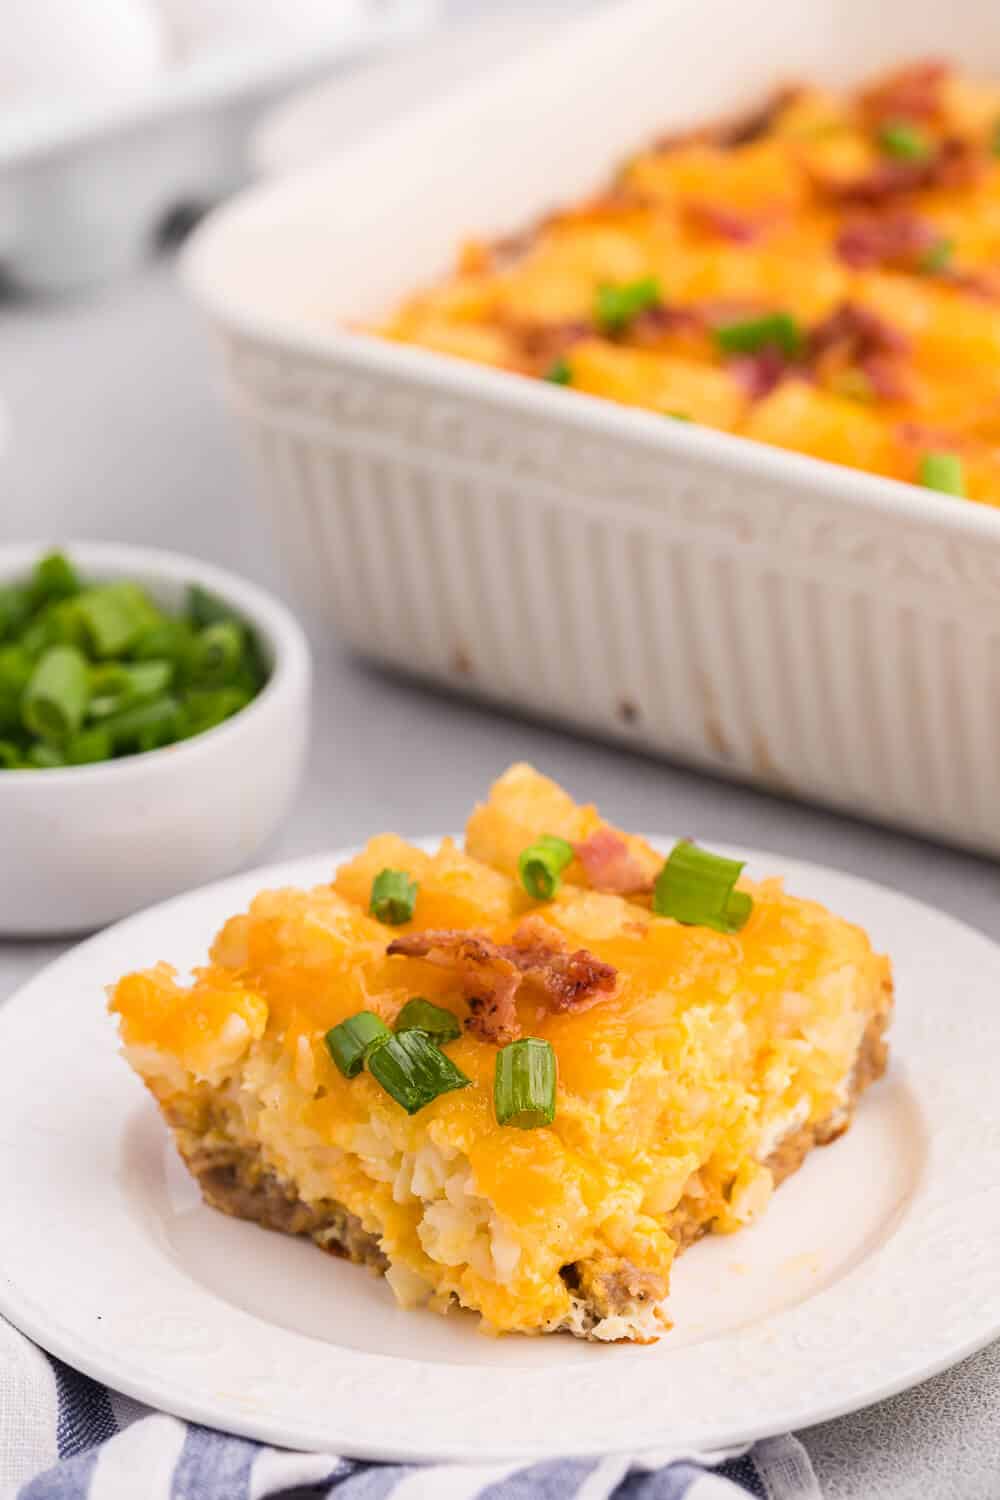 A slice of tater tot breakfast casserole served on a plate.